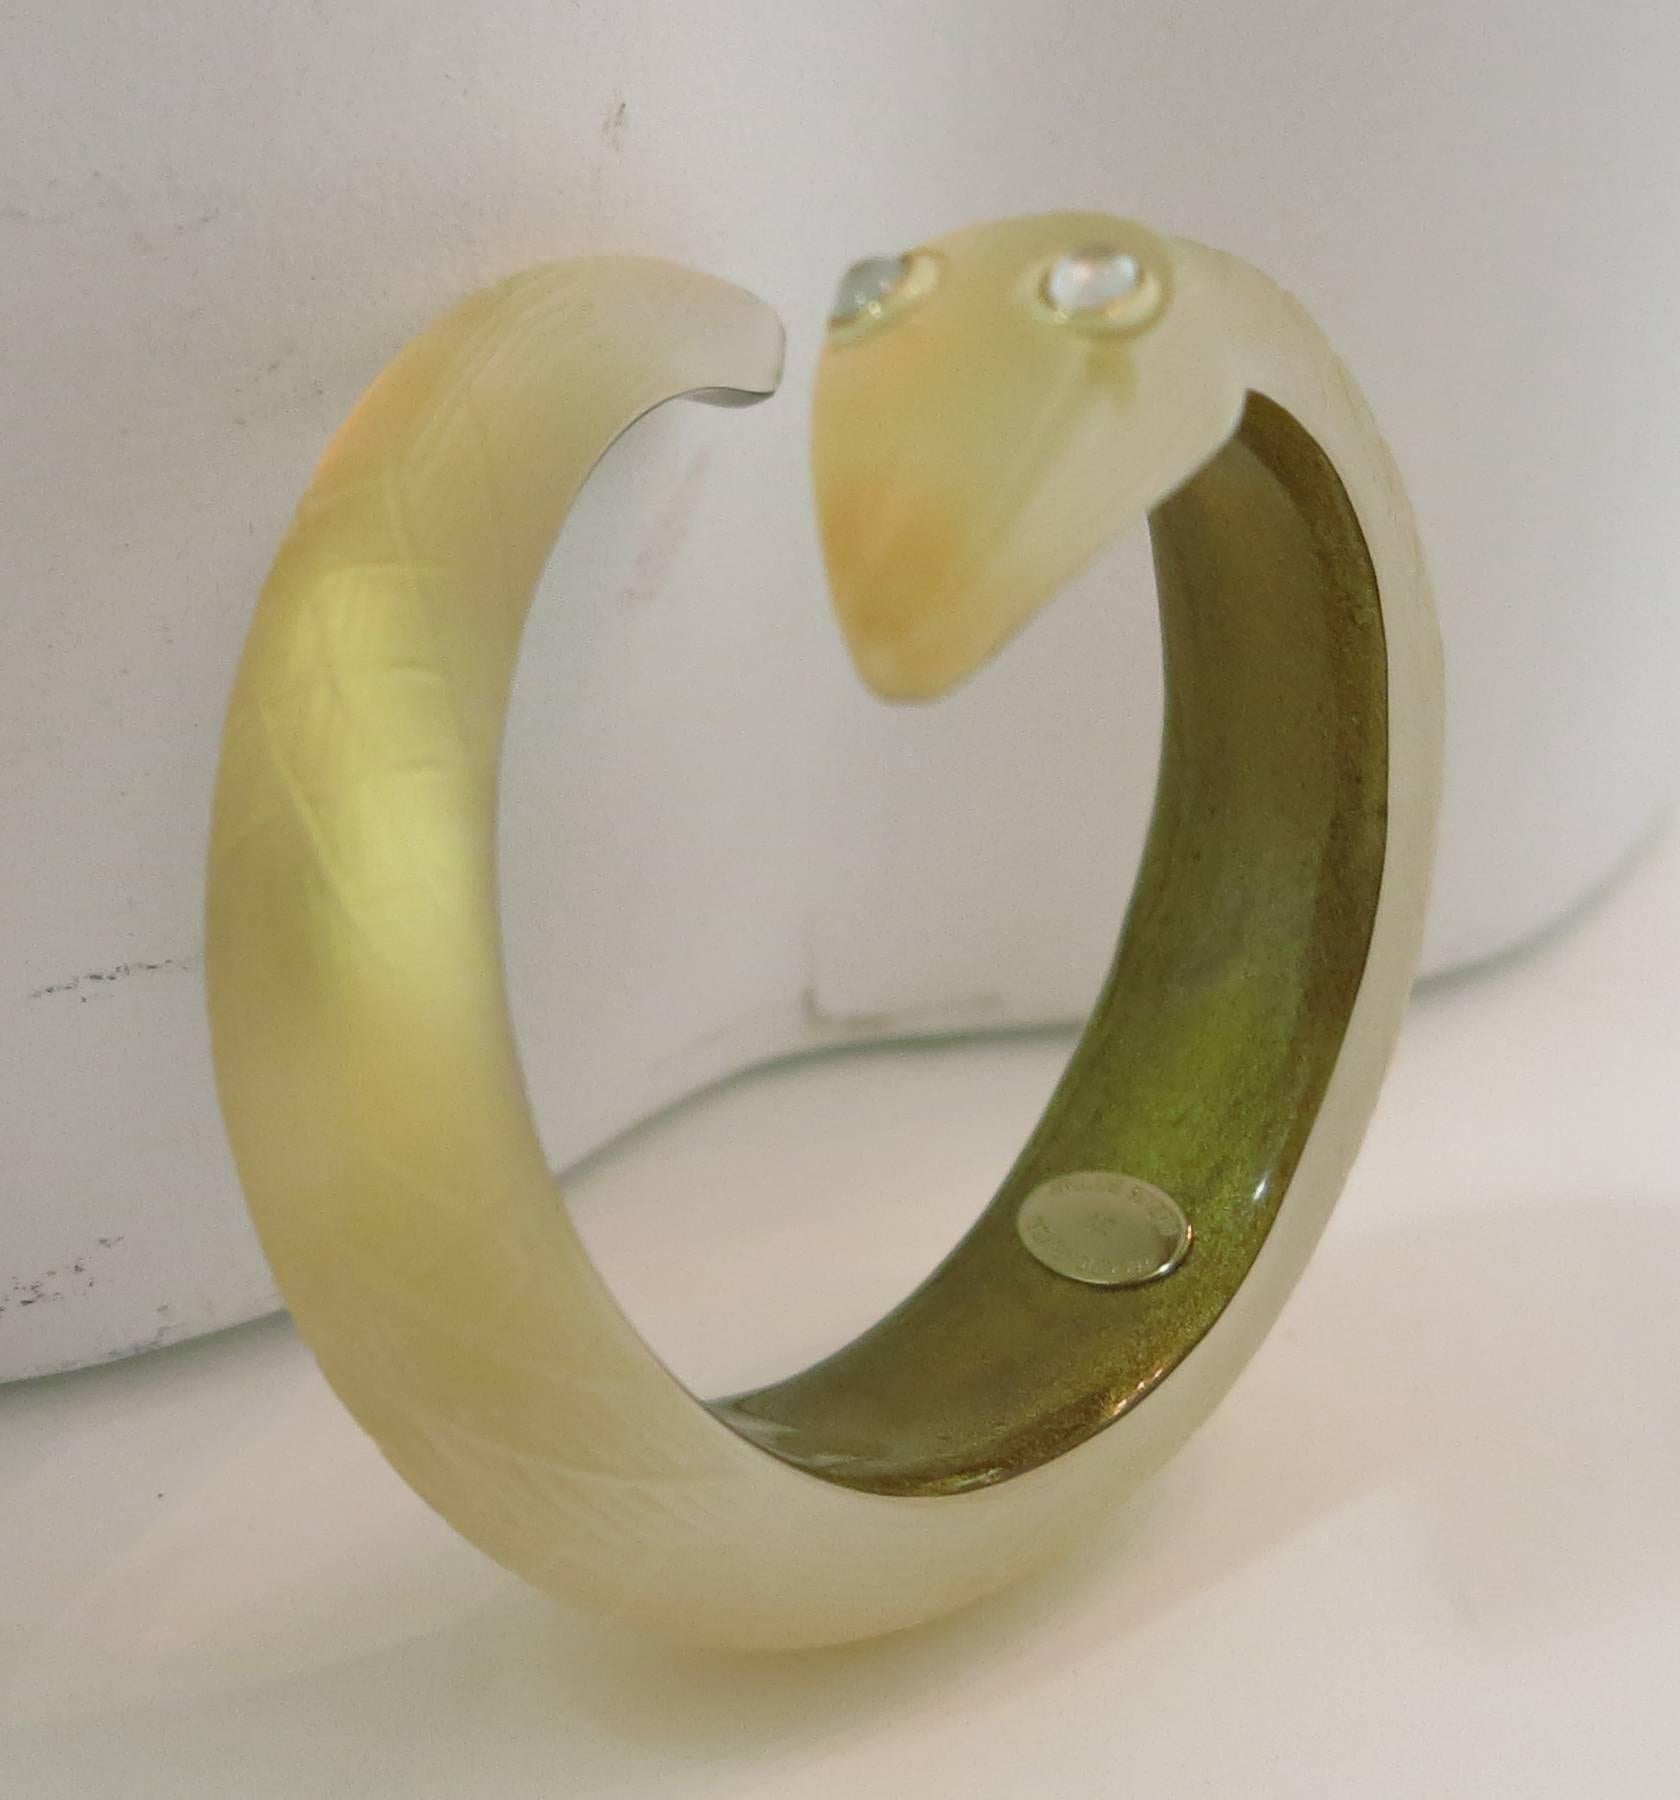 Alexis Bittar hand carved gold Lucite snake bracelet...Carved details in frosty Lucite, the center is layered with sparkly gold that adds a delicate gold simmer...The snake has bezel set moonstone inspired eyes...Fits a small-small medium 